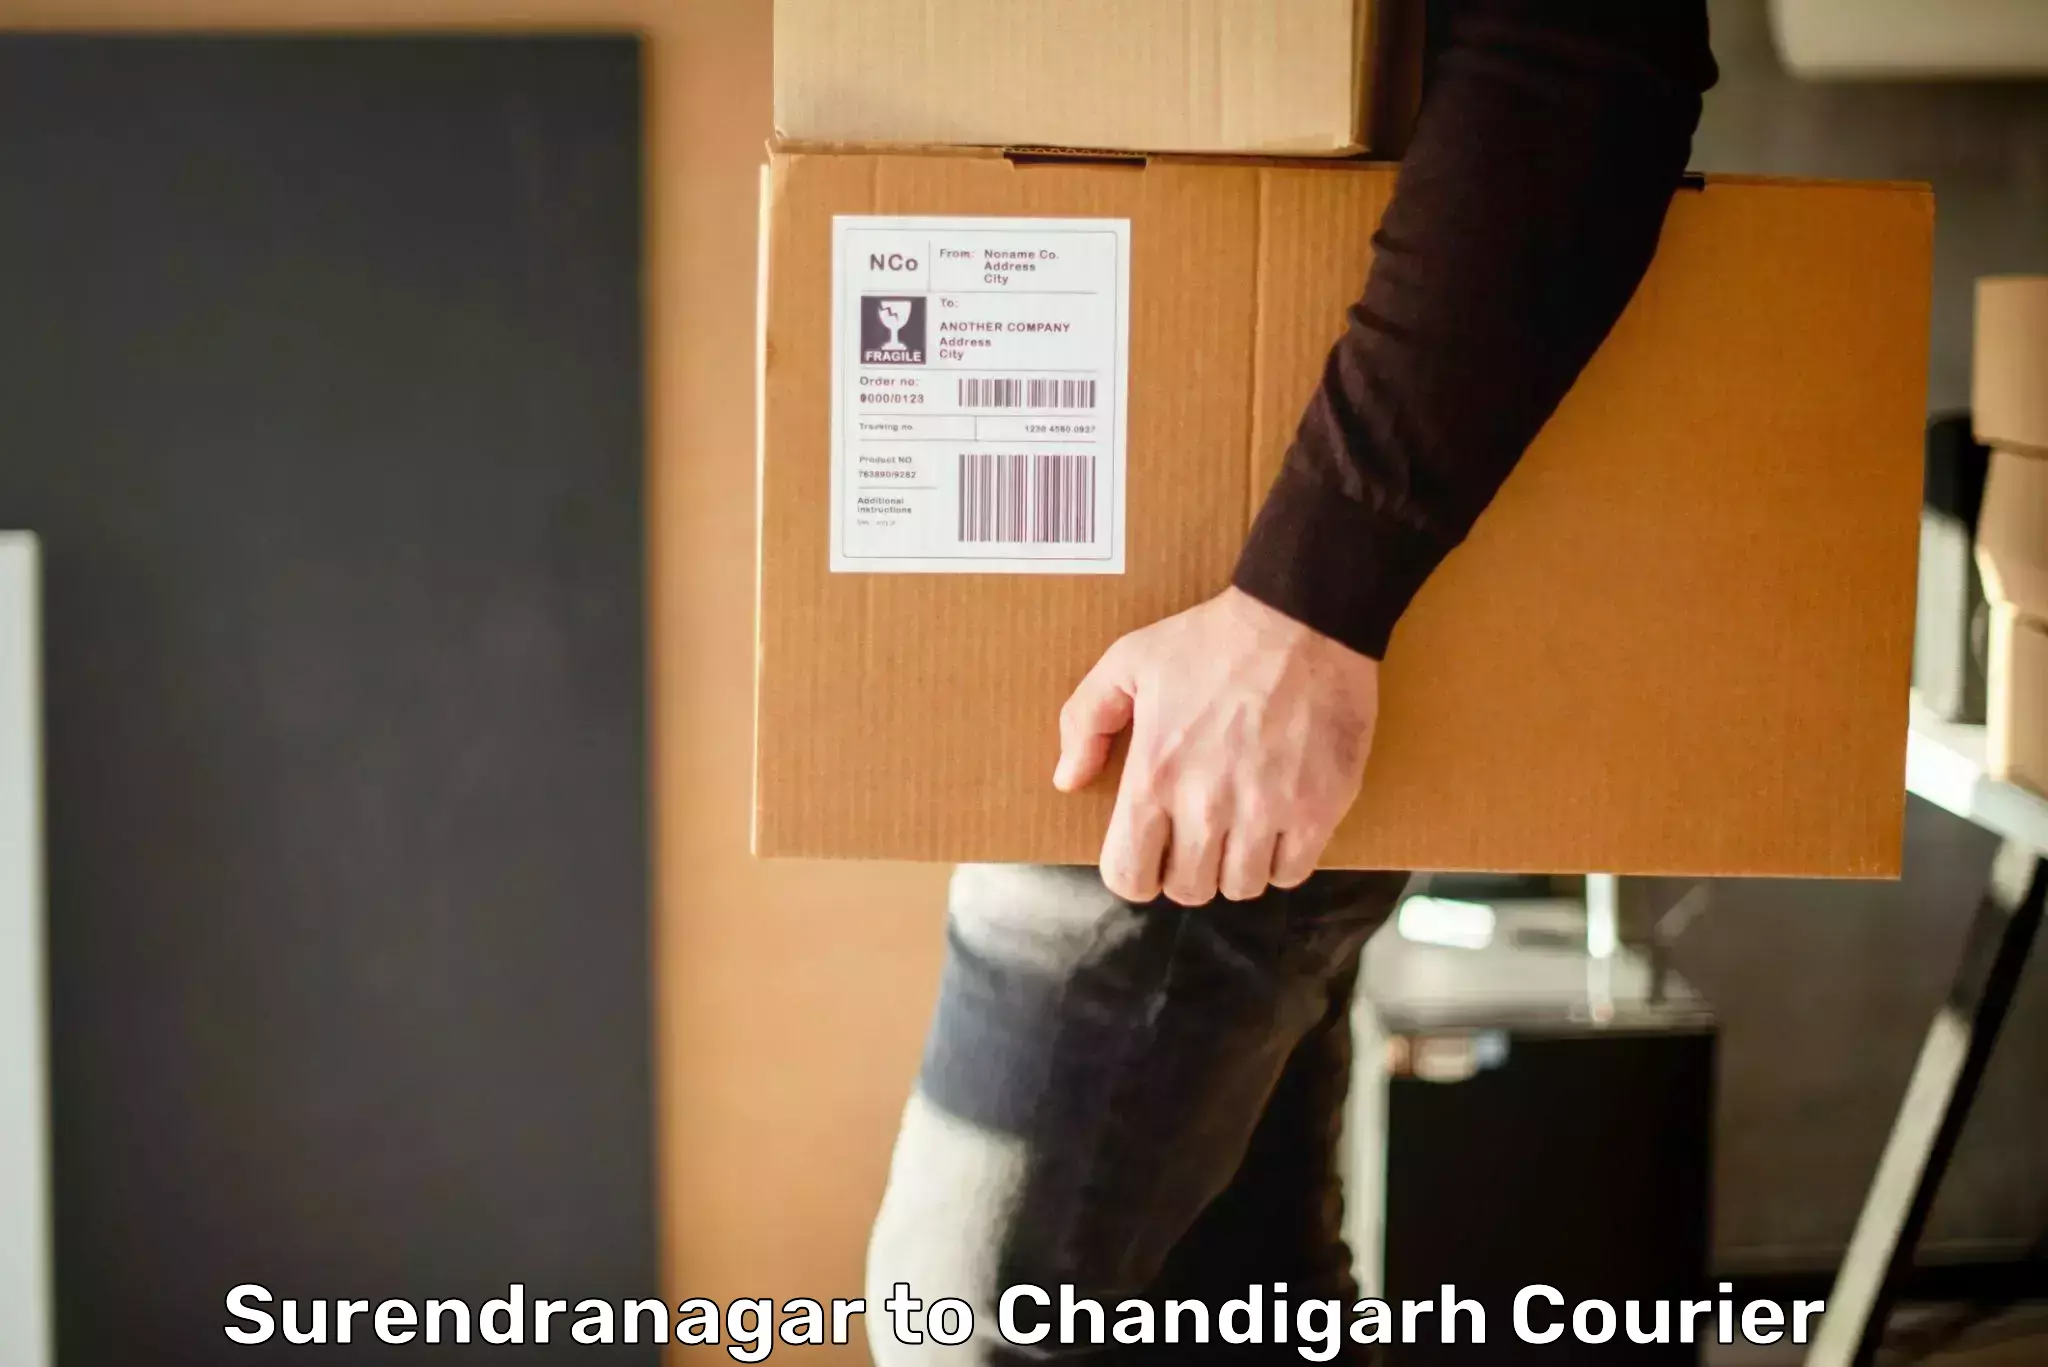 Package delivery network Surendranagar to Chandigarh